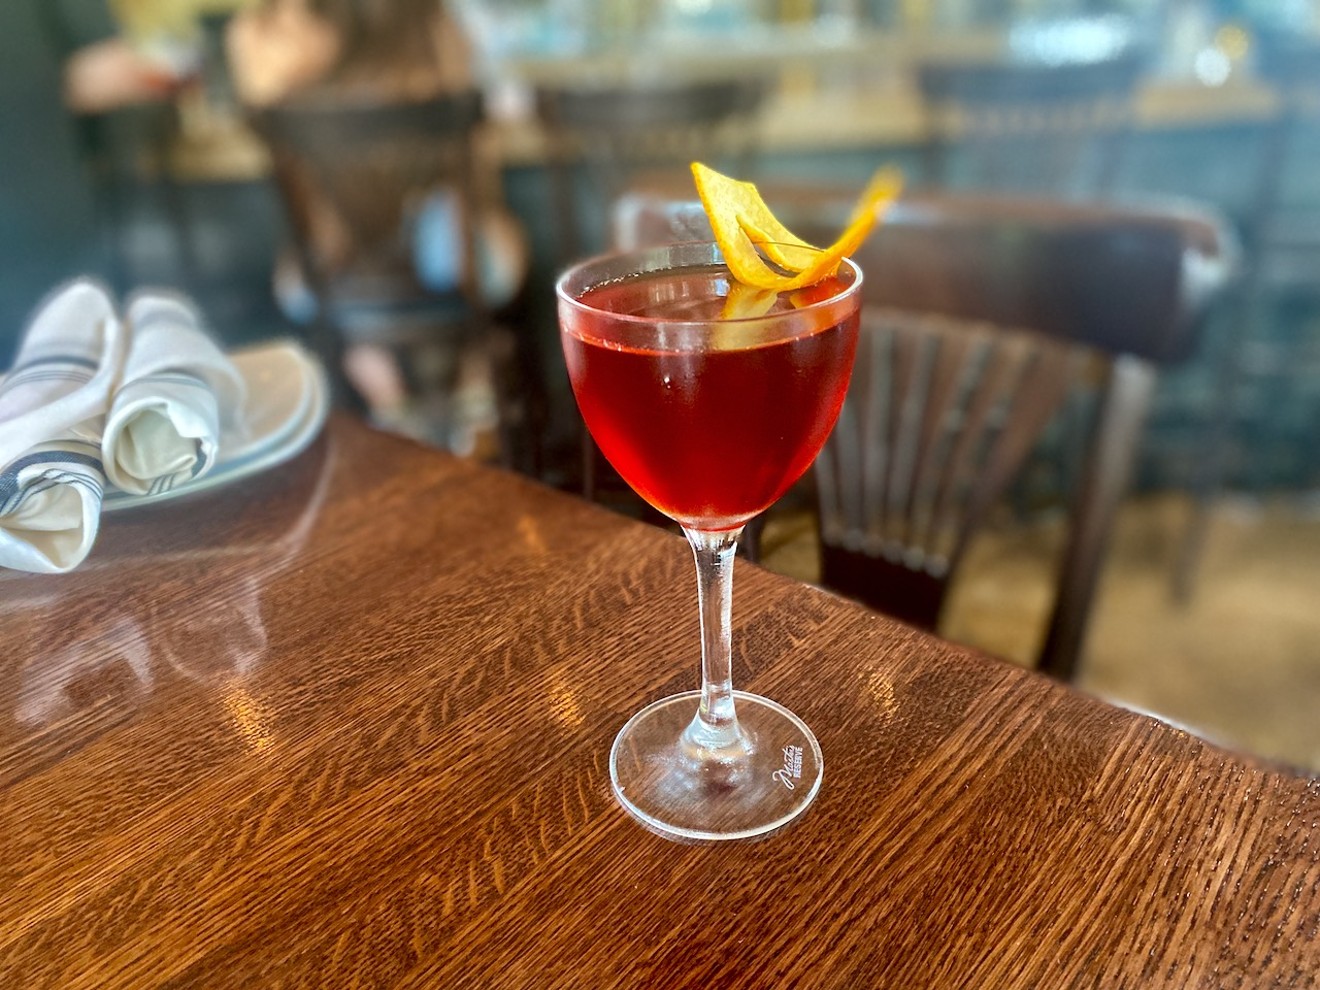 Your chances to have a Boulevardier at Boulevardier are rapidly dwindling. The Bishop Arts favorite will close its doors later this spring.